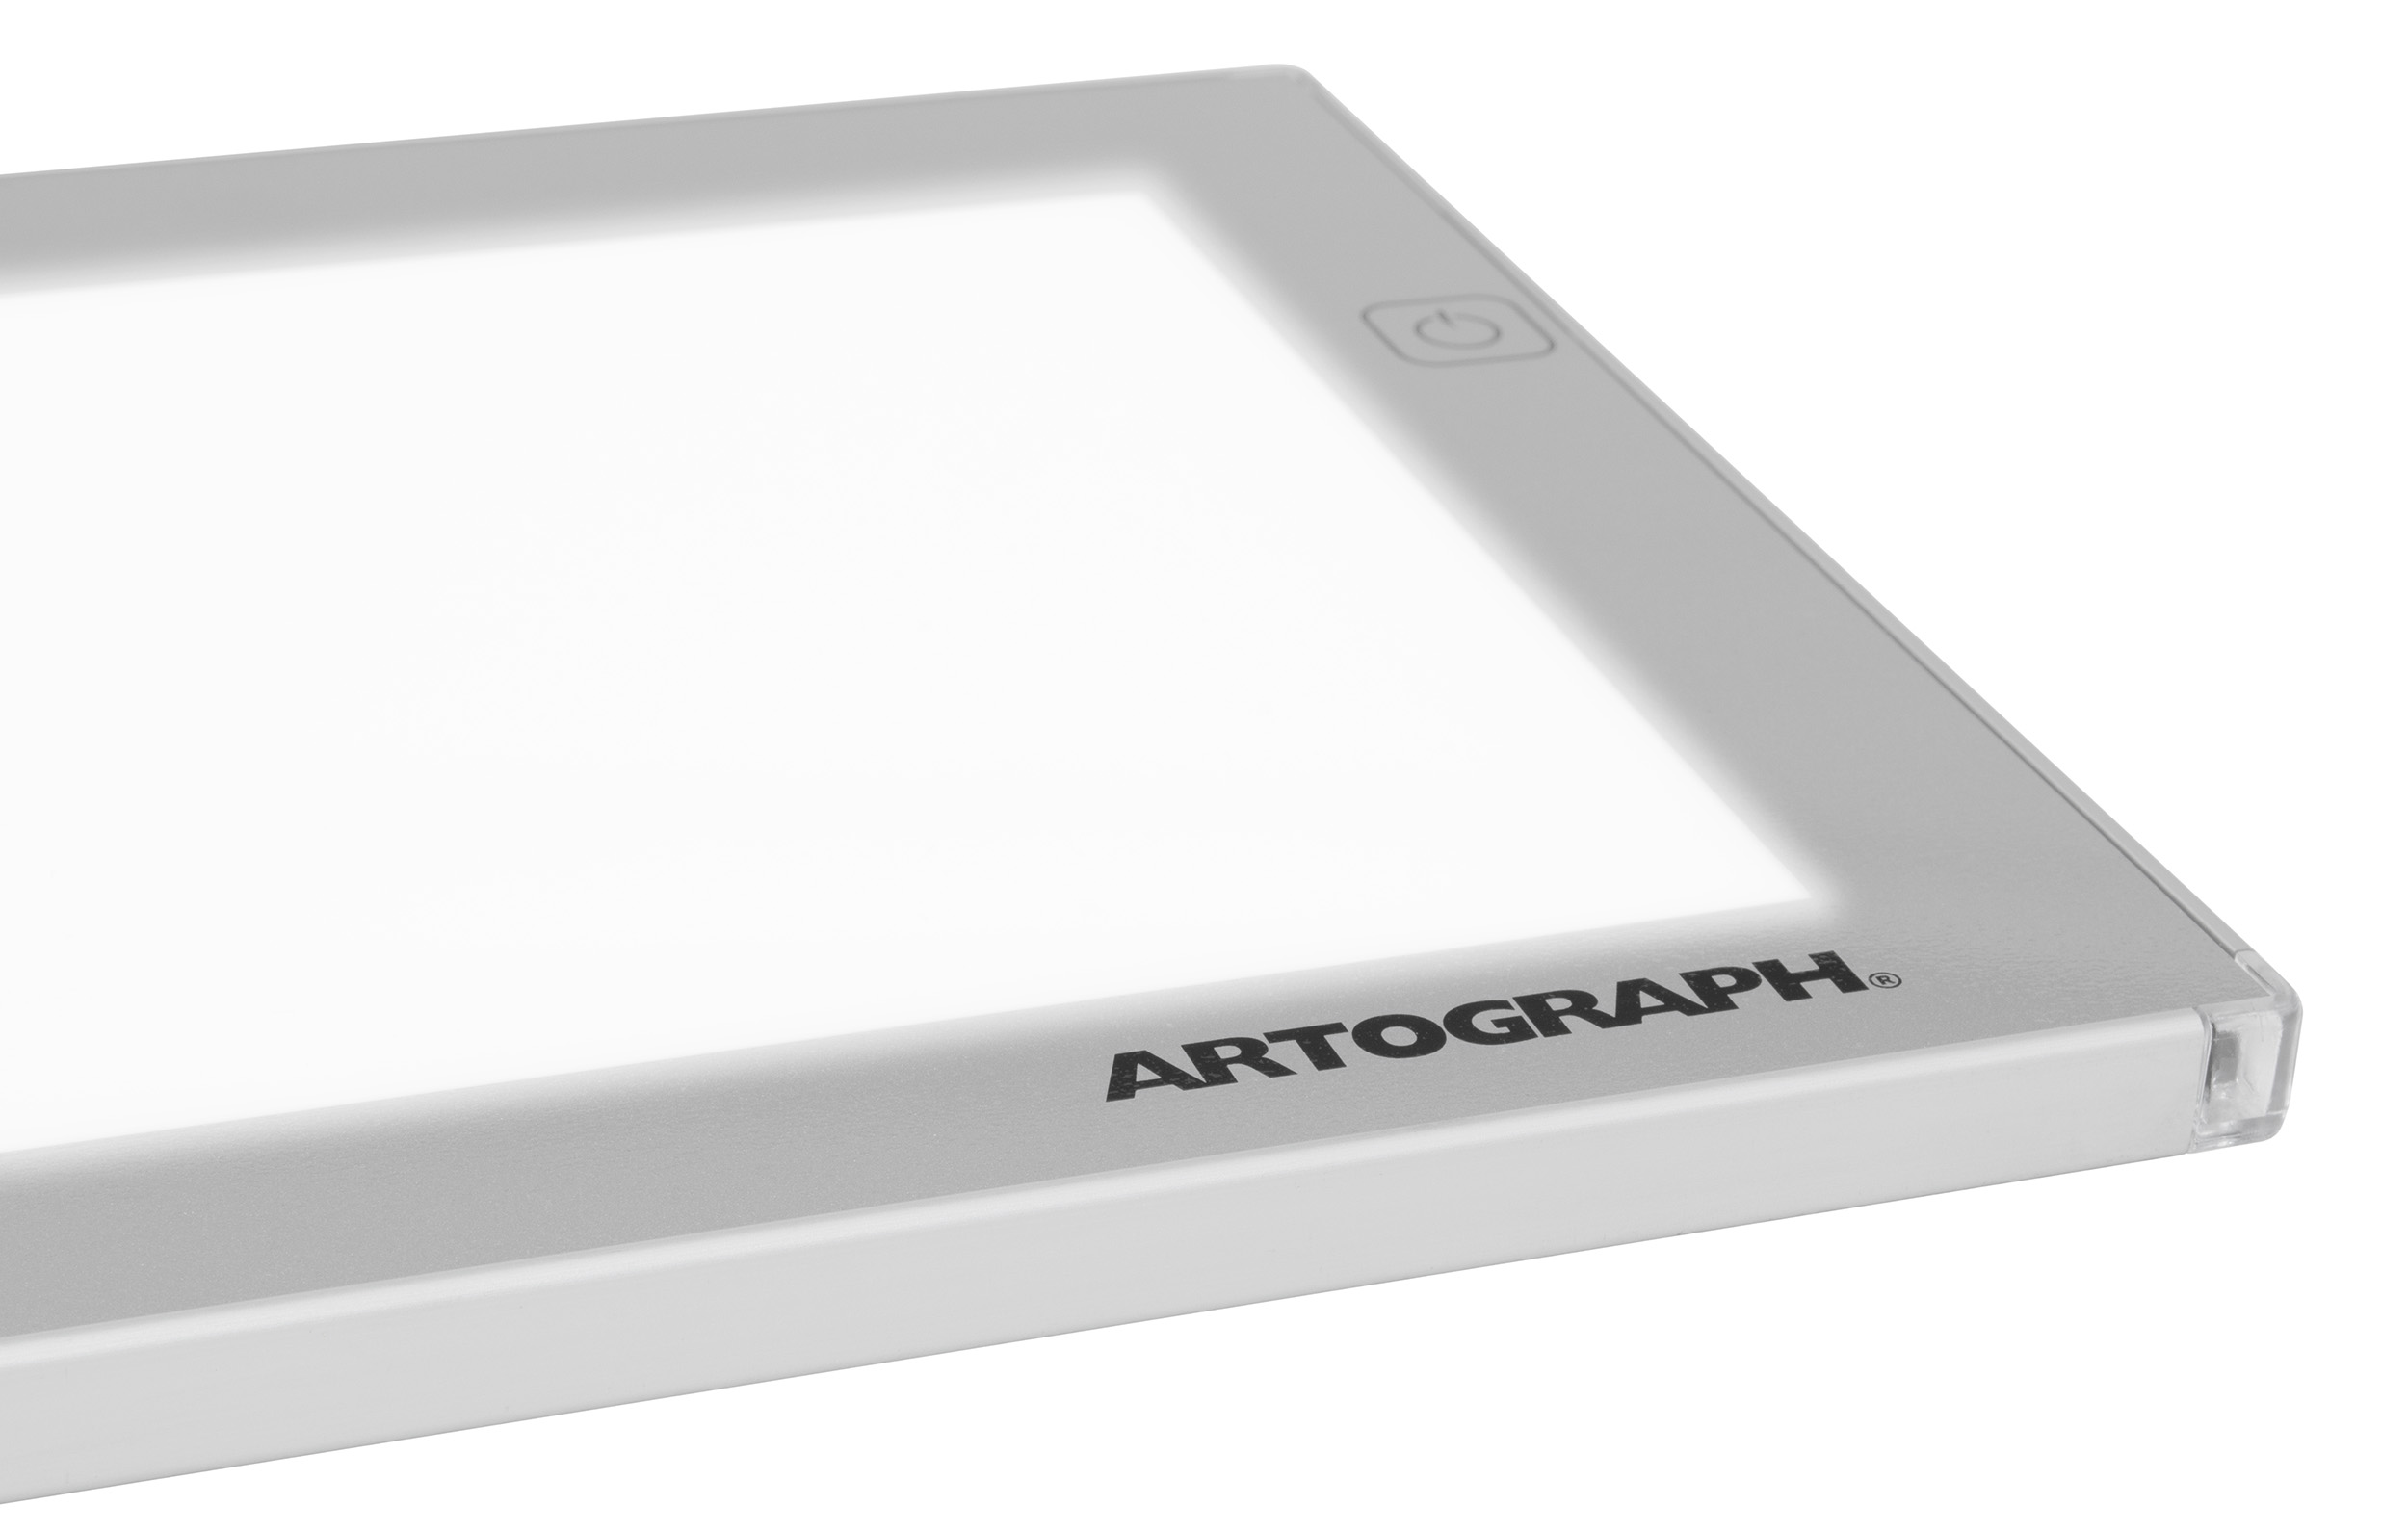 Artograph LightPad 920 LX 9x6 Inch Thin Dimmable LED Light Box for Tracing  and Drawing - 25920 